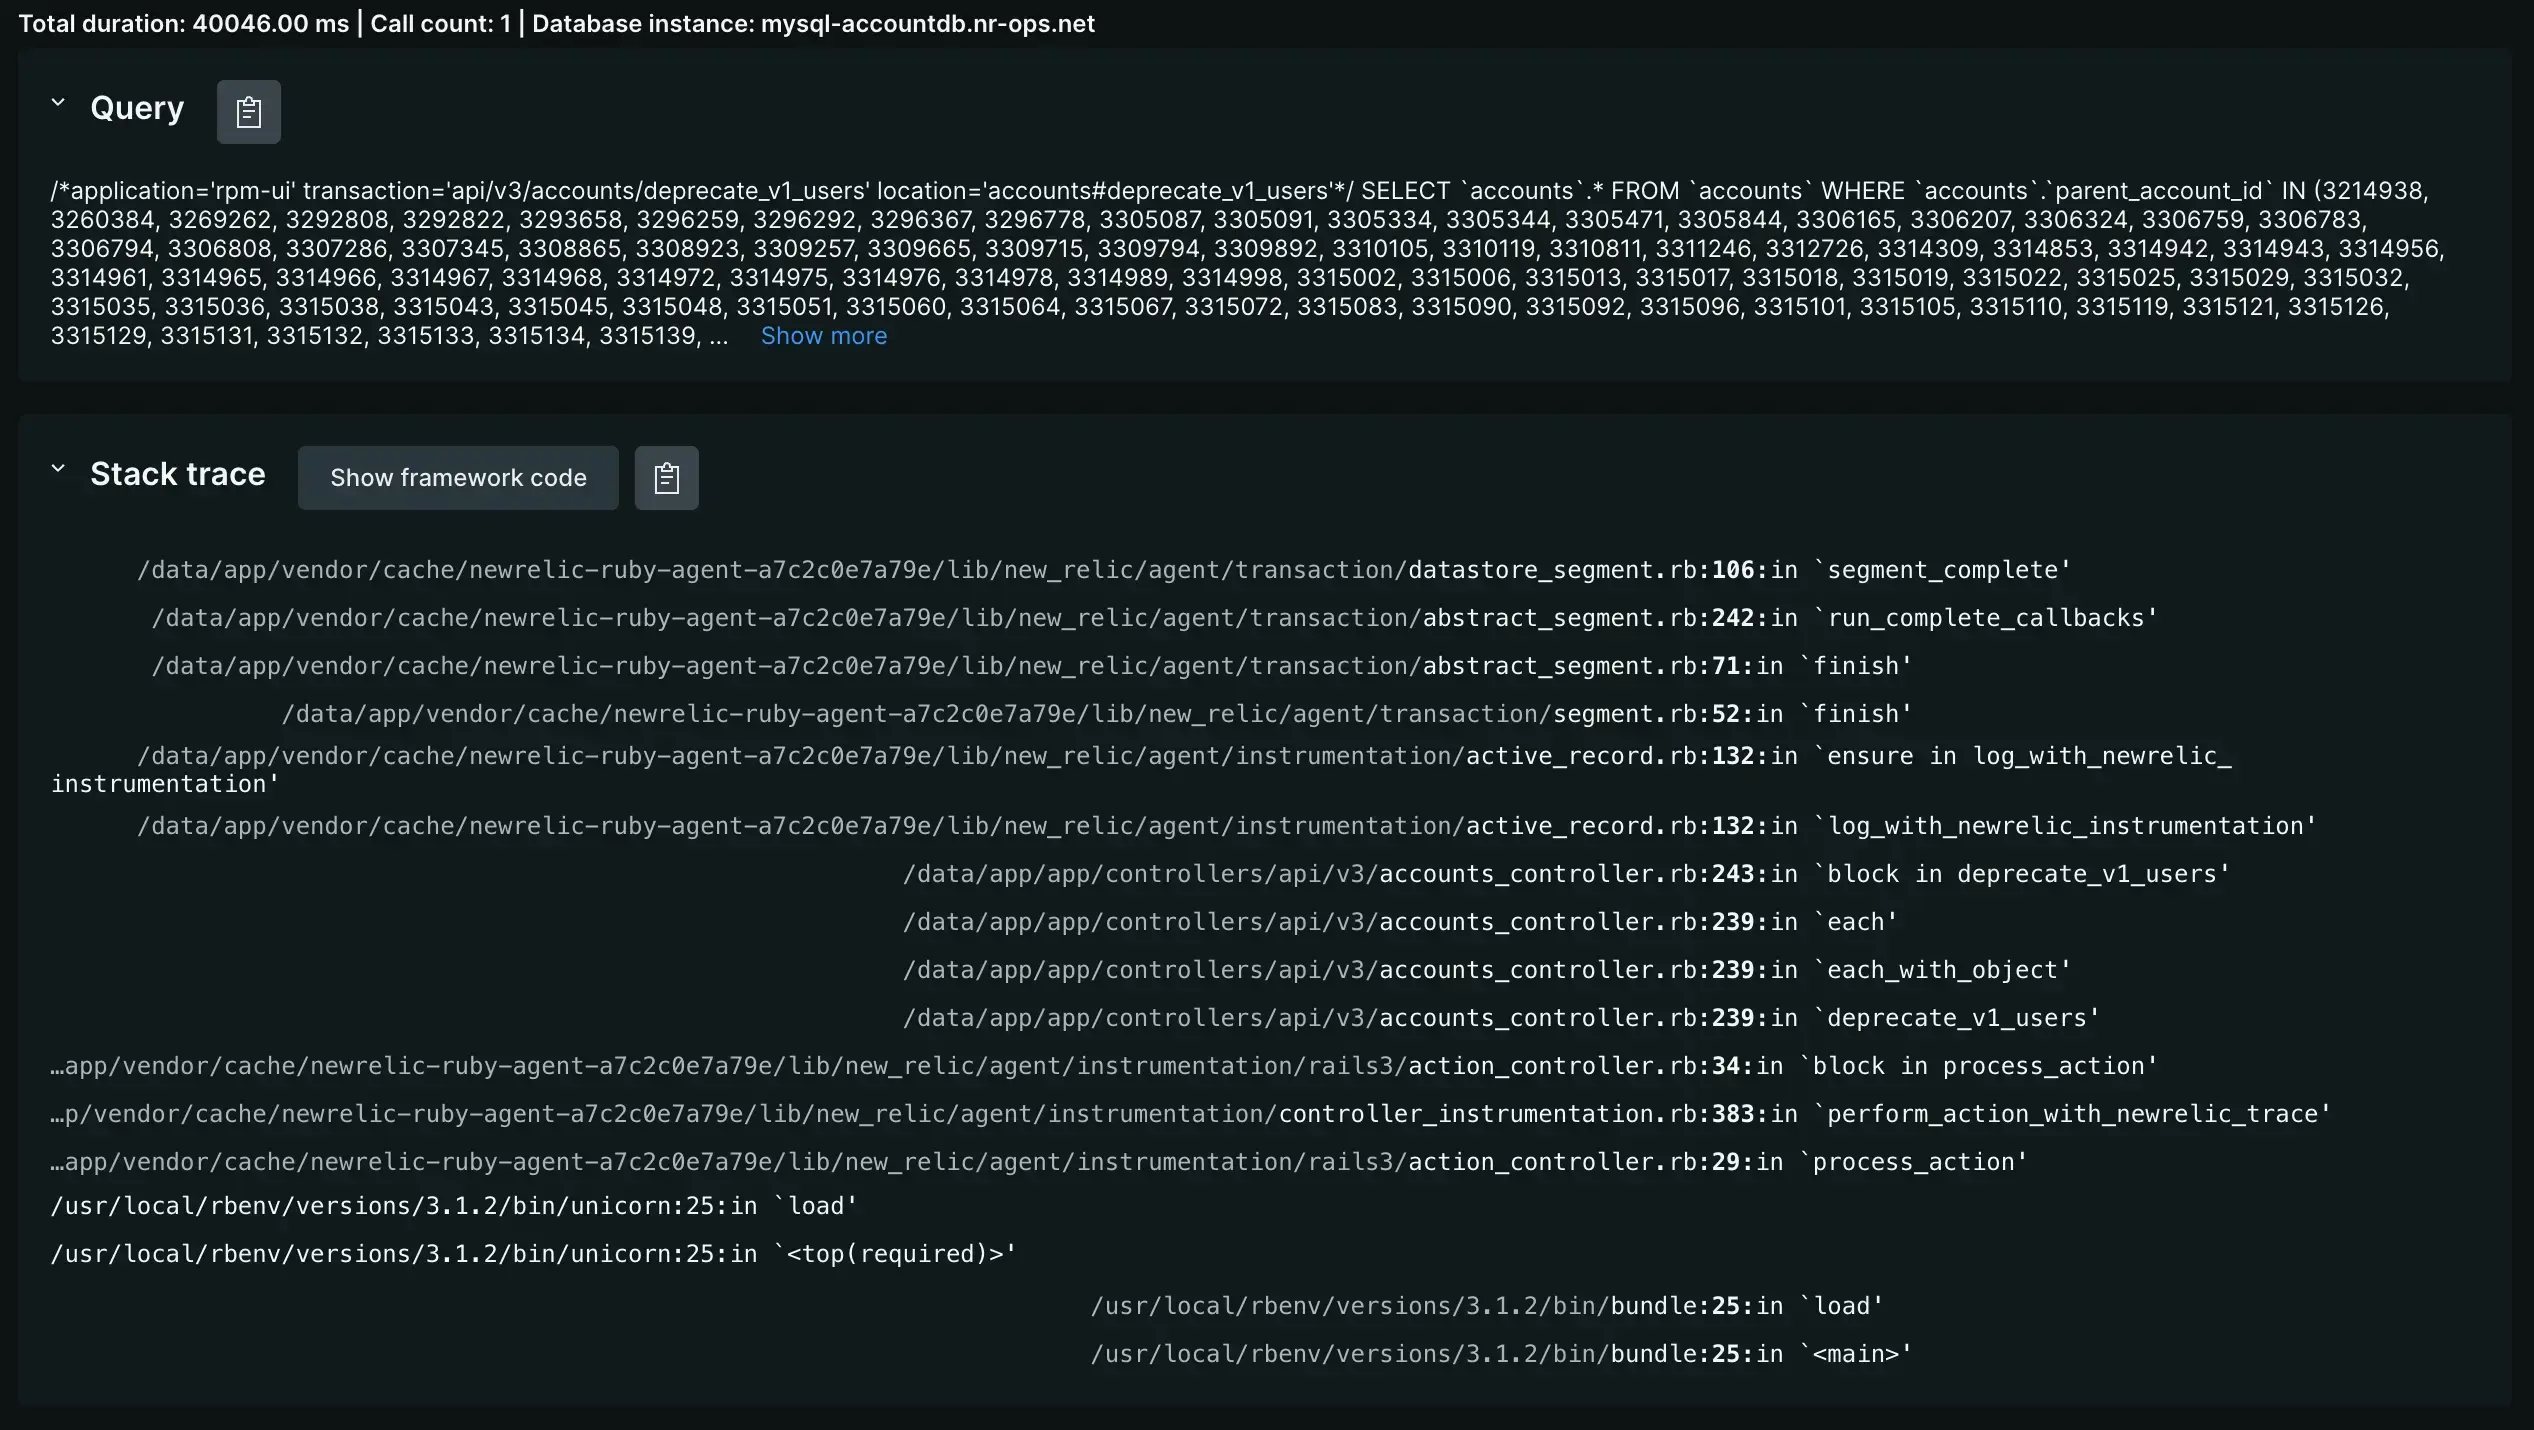 A screenshot showing the stacktrace view of a transaction trace in the UI